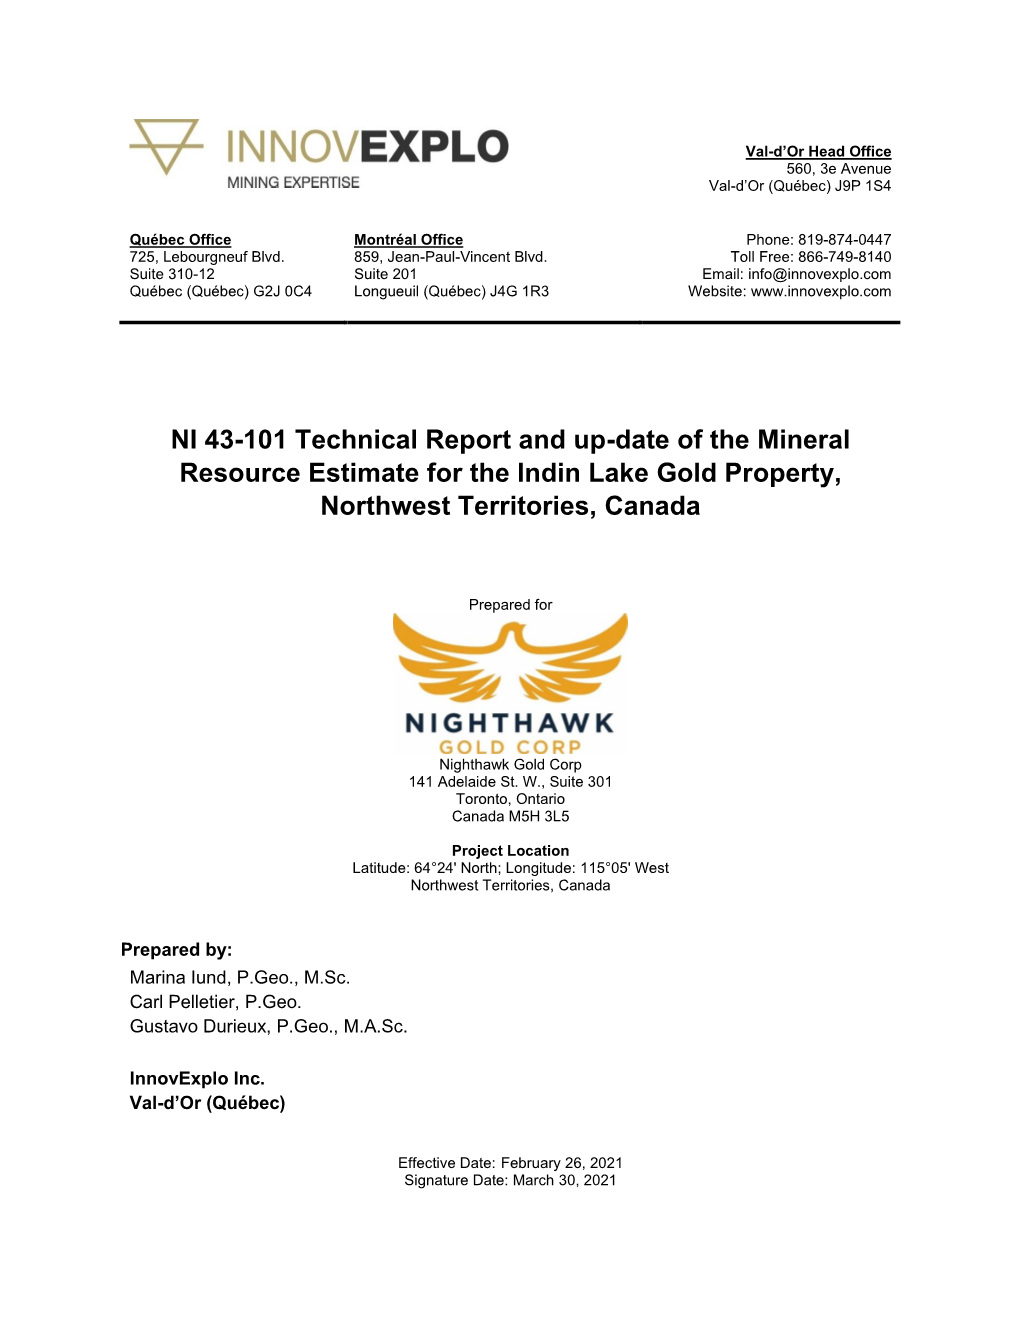 NI 43-101 Technical Report and Up-Date of the Mineral Resource Estimate for the Indin Lake Gold Property, Northwest Territories, Canada